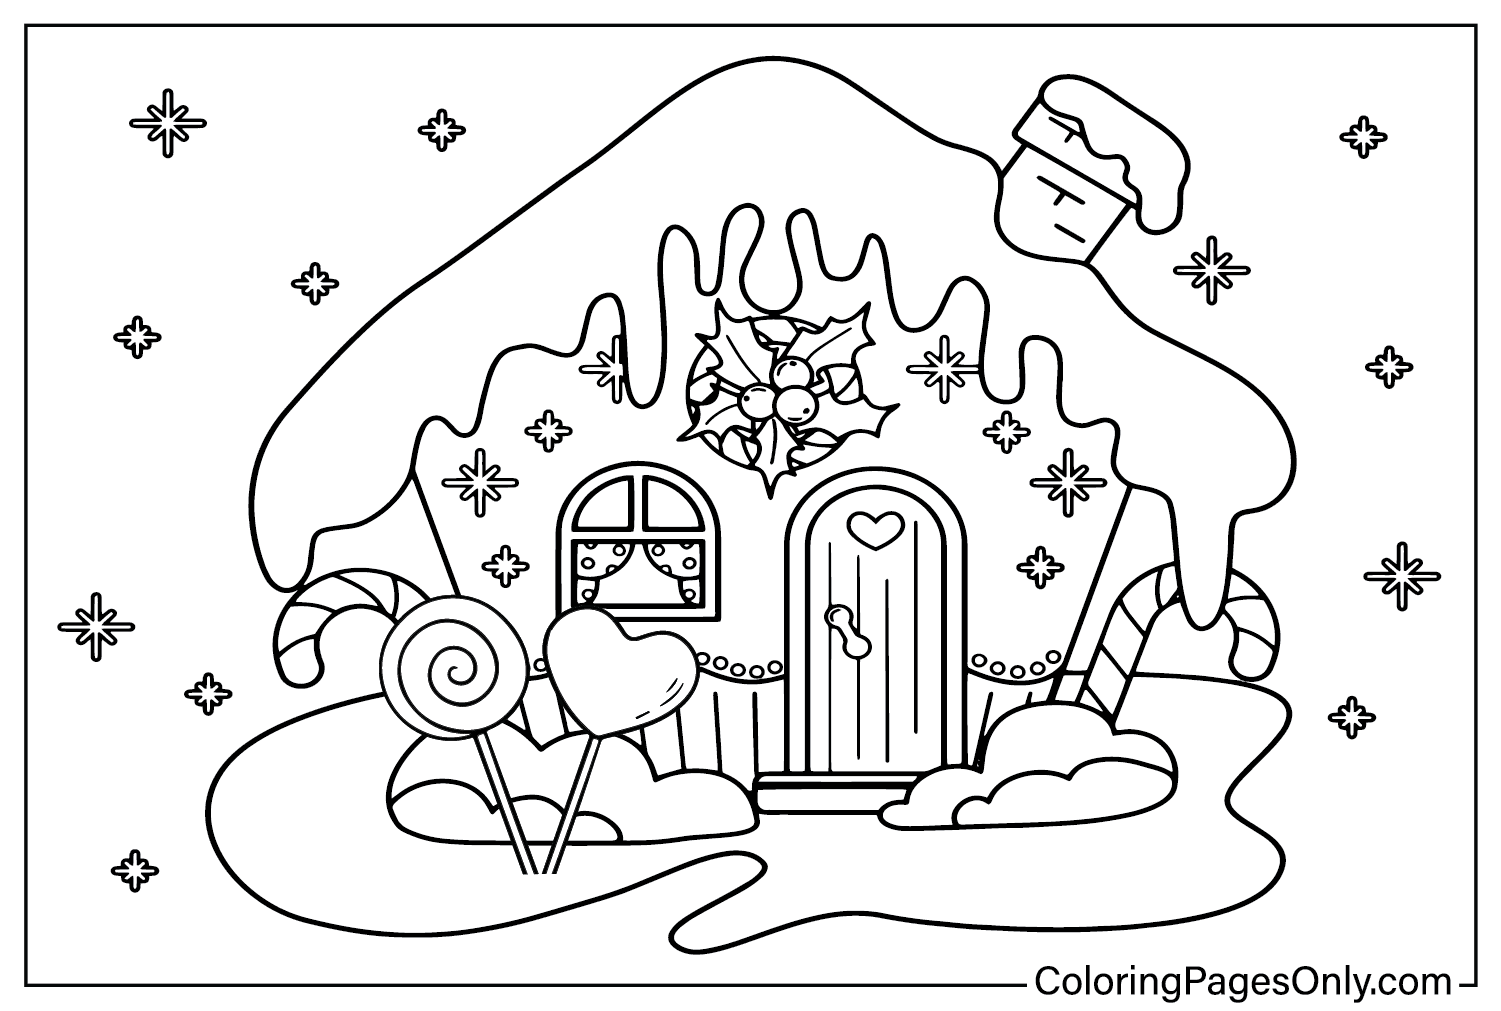 Gingerbread House Coloring Page Printable from Gingerbread House